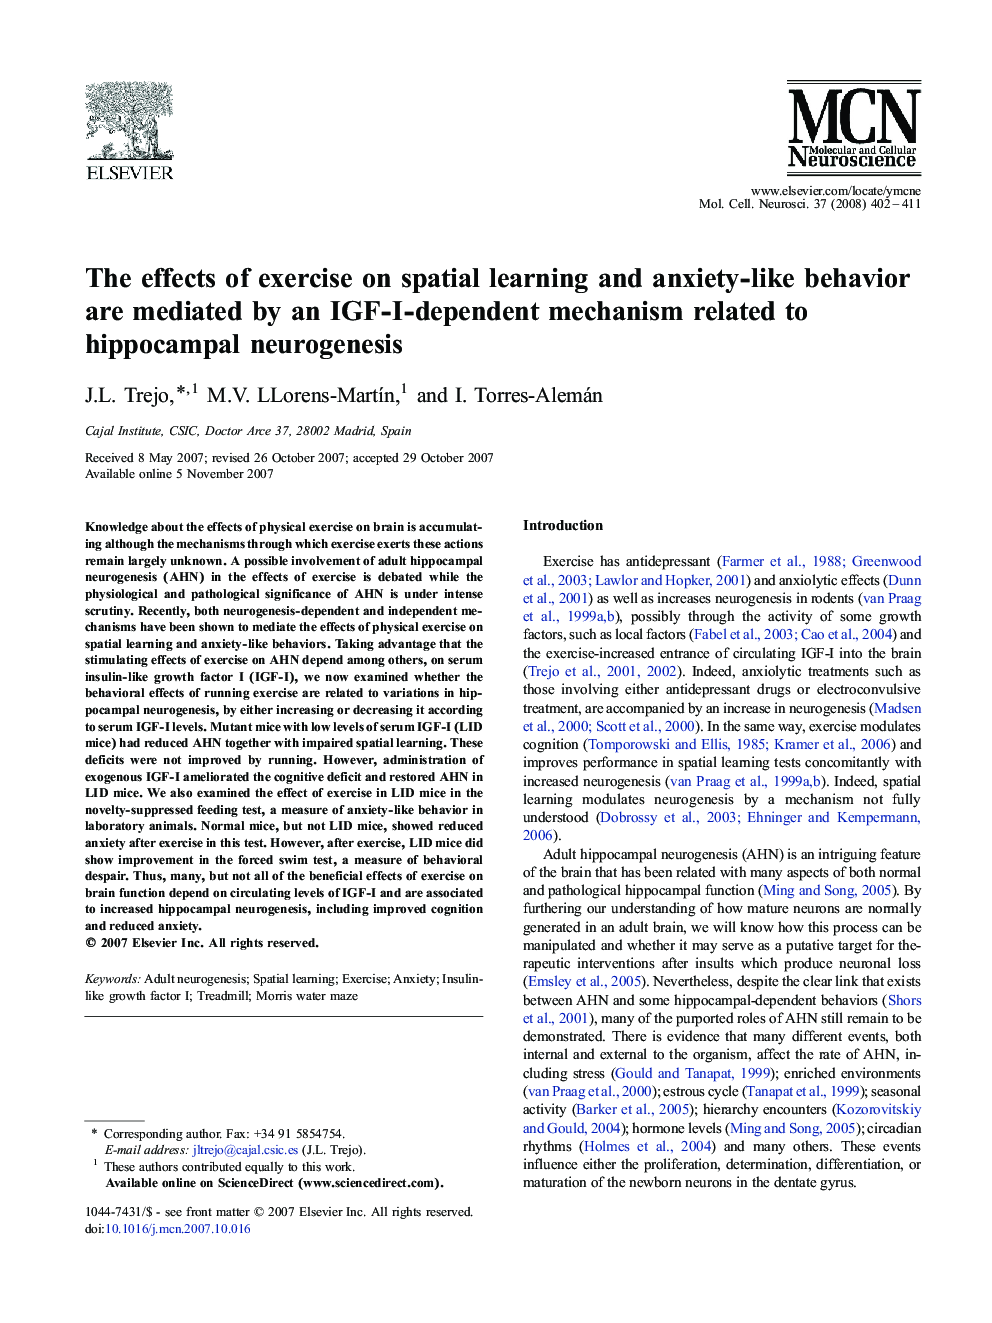 The effects of exercise on spatial learning and anxiety-like behavior are mediated by an IGF-I-dependent mechanism related to hippocampal neurogenesis